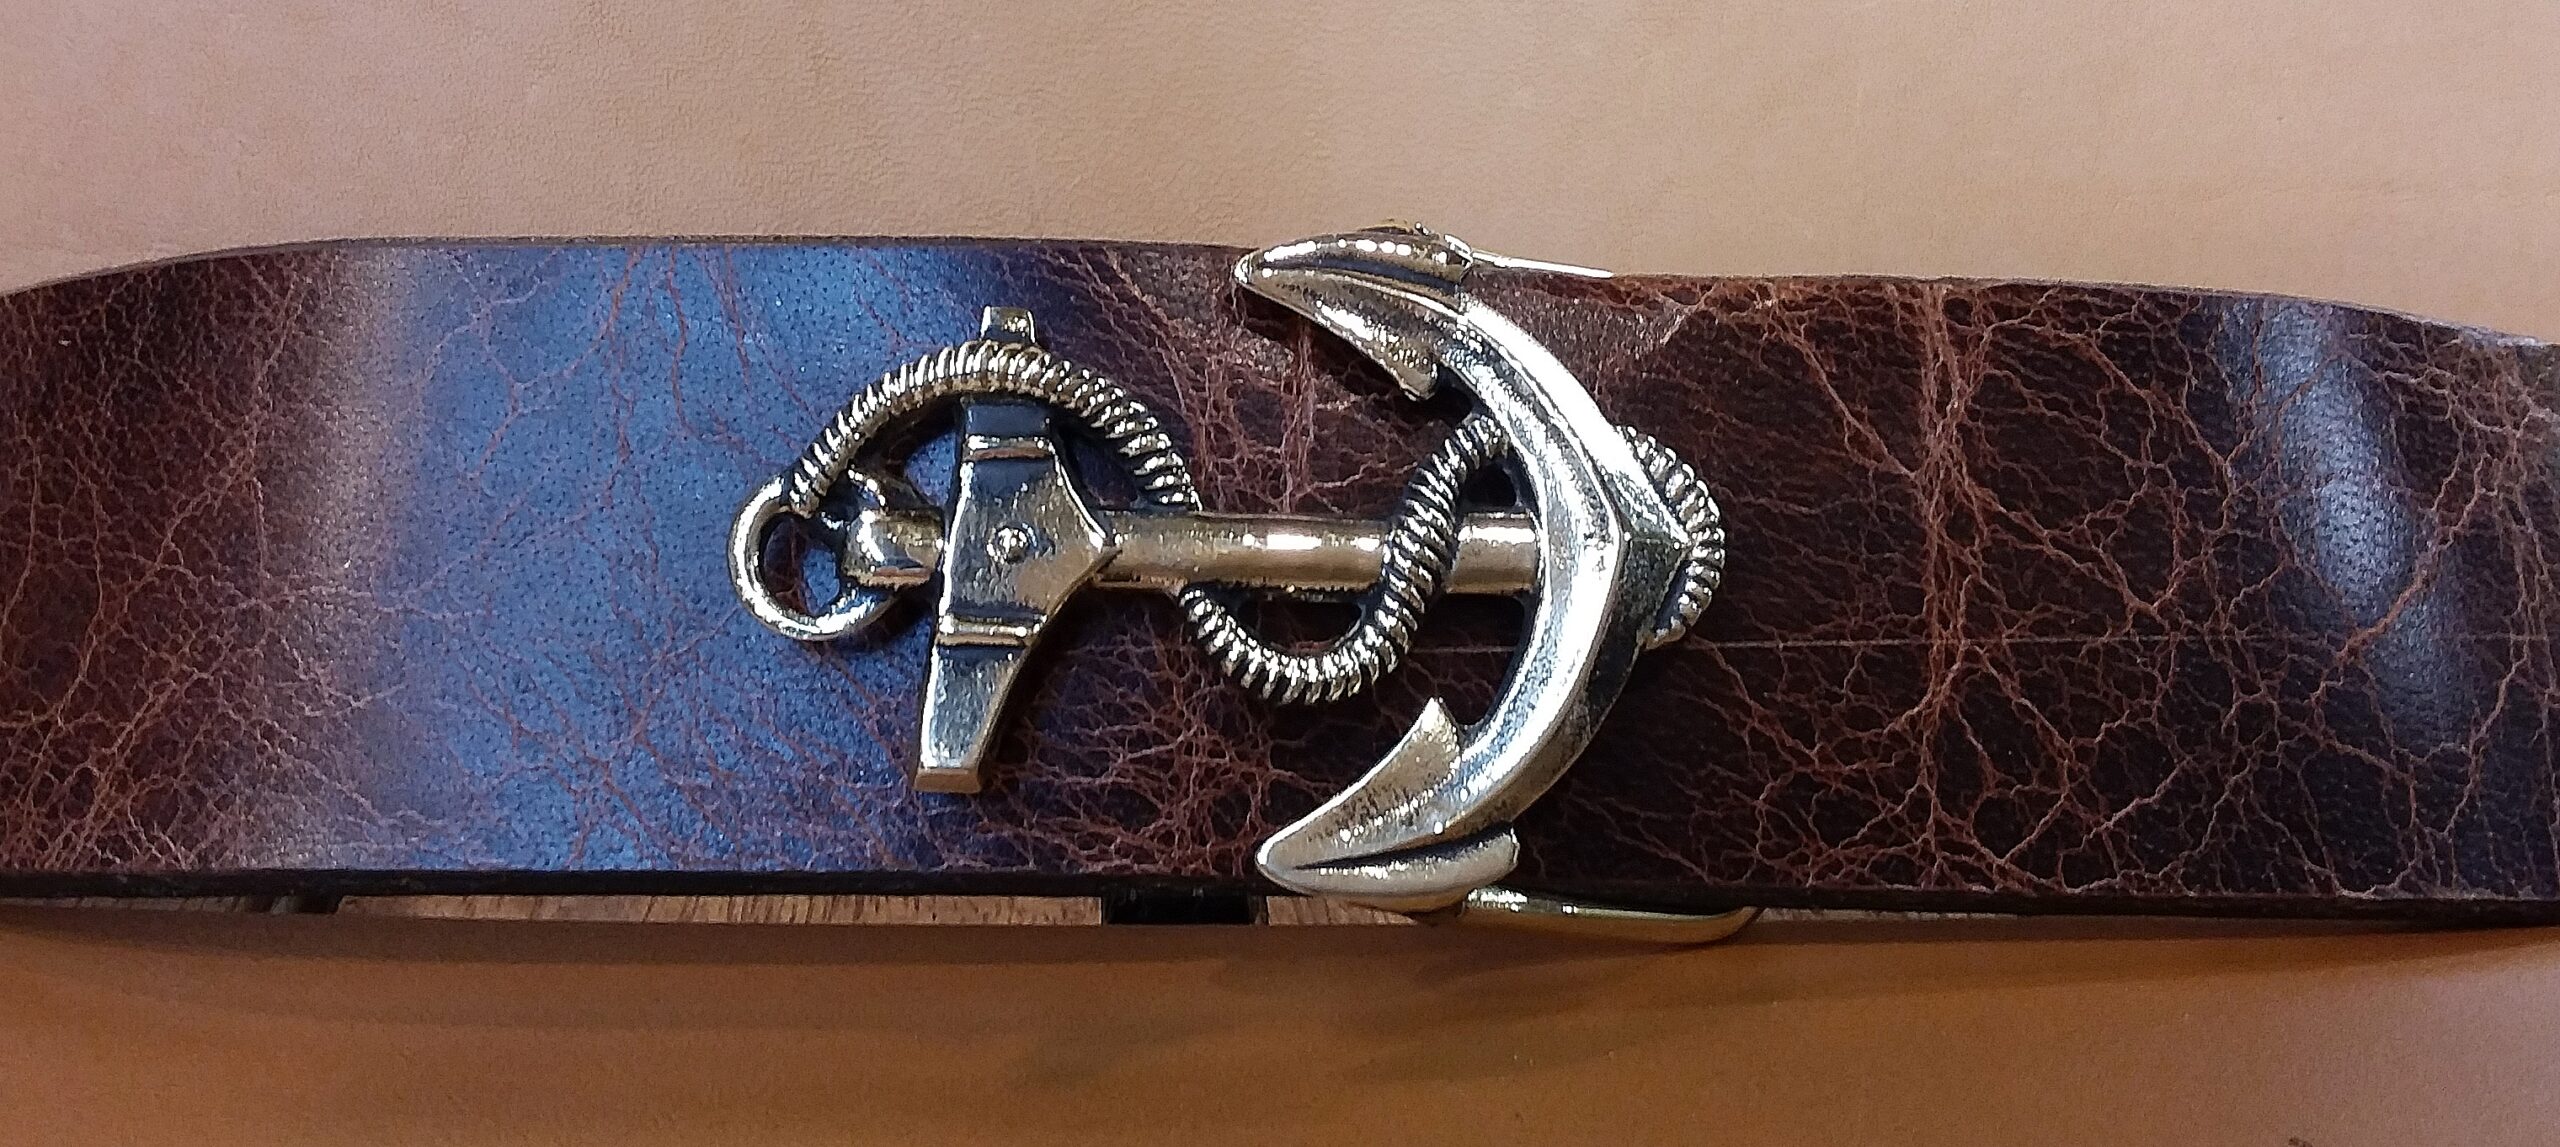 Anchor Rope Buckle - Cellar Leather